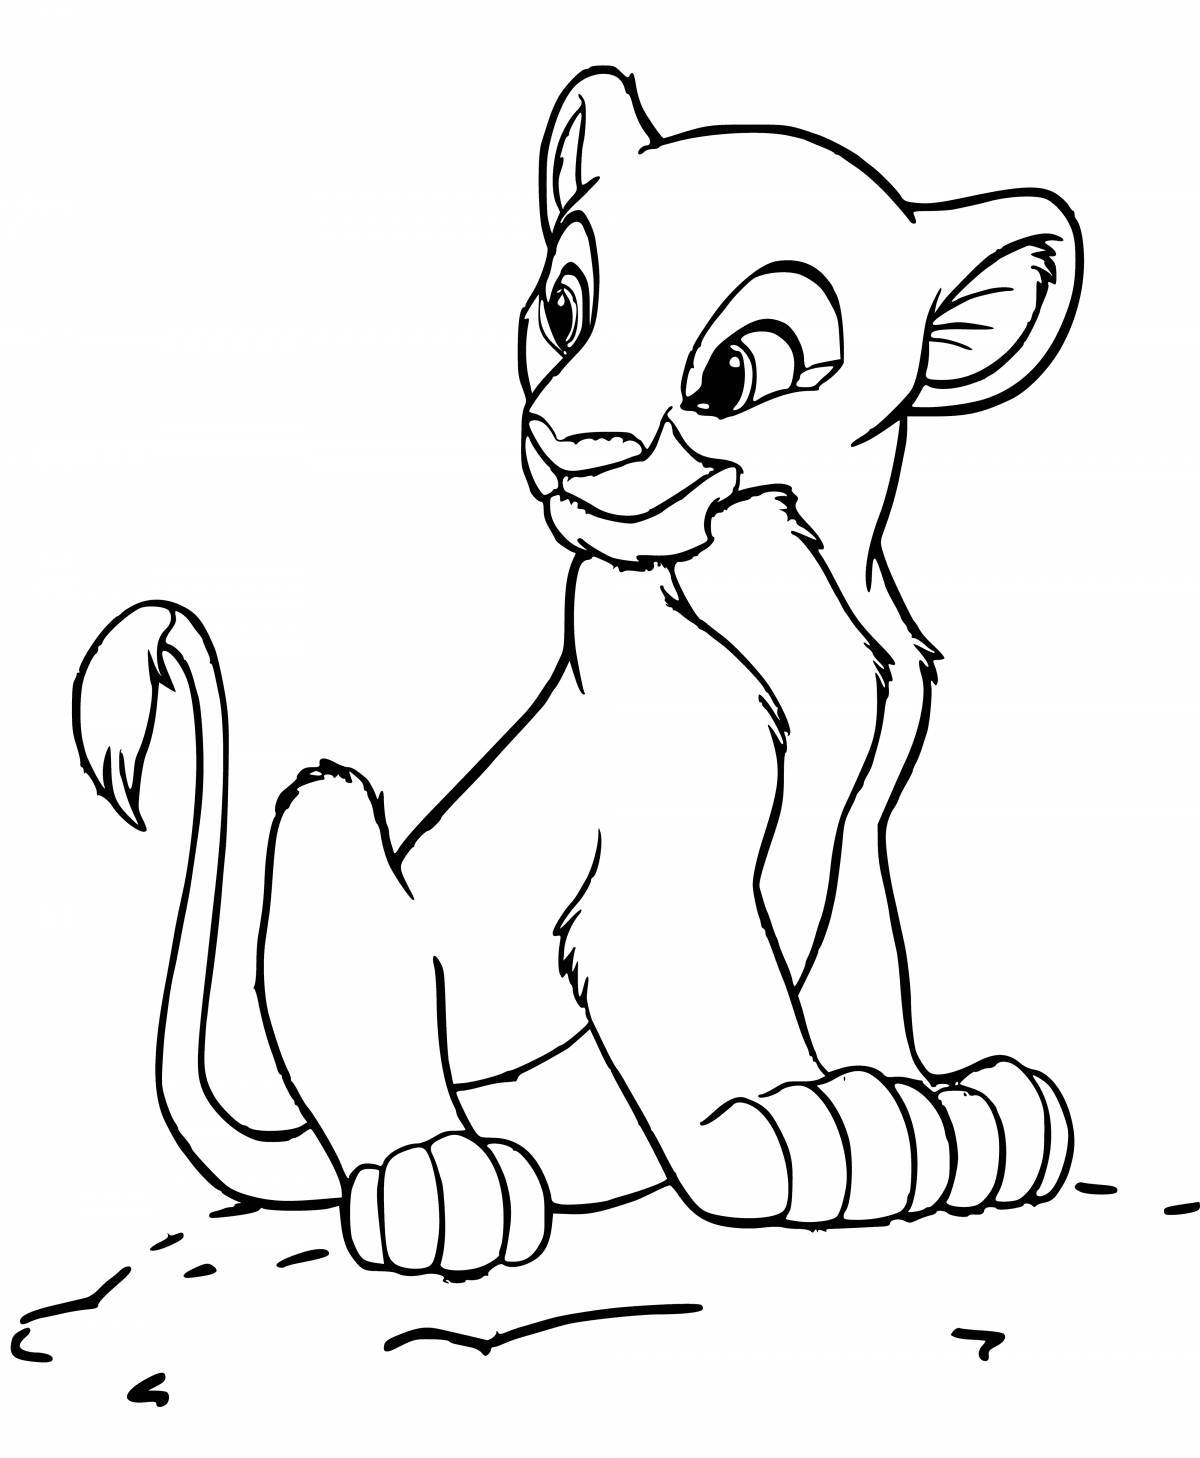 Simba's adorable coloring page